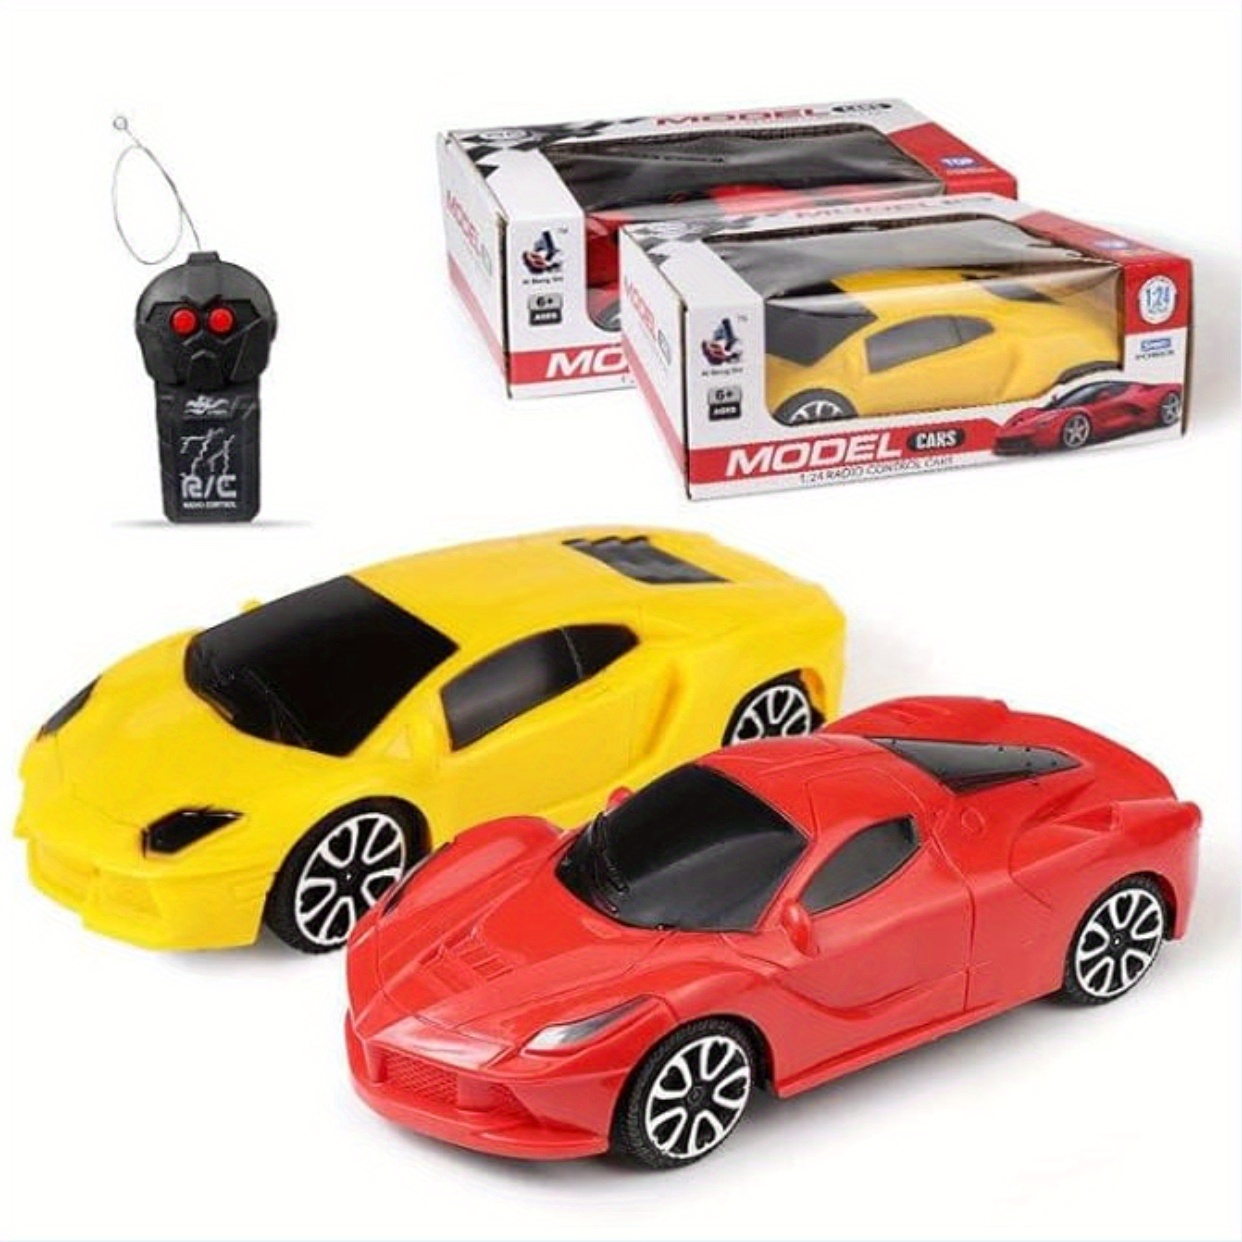 ARRIS Mini RC Car, Radio Remote Control Micro Racing Can RC Car Toy Gift  for Kids (2pcs) : Toys & Games 